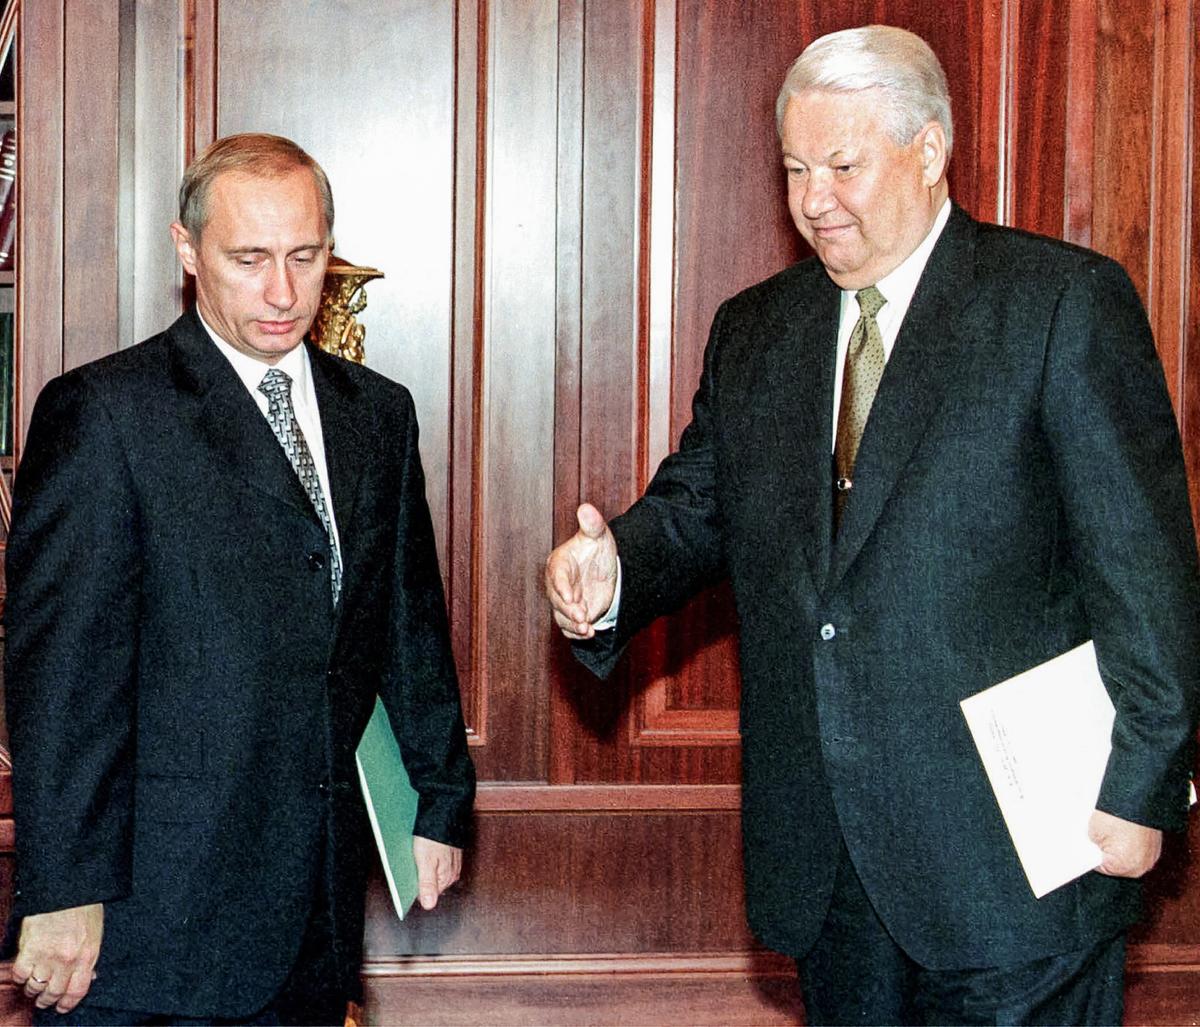 Russian President Boris Yeltsin (R) invites Prime Minister Vladimir Putin (L) to start the talks during their meeting in the Kremlin in Moscow, on Aug. 17, 1999. (STF/POOL/AFP via Getty Images)